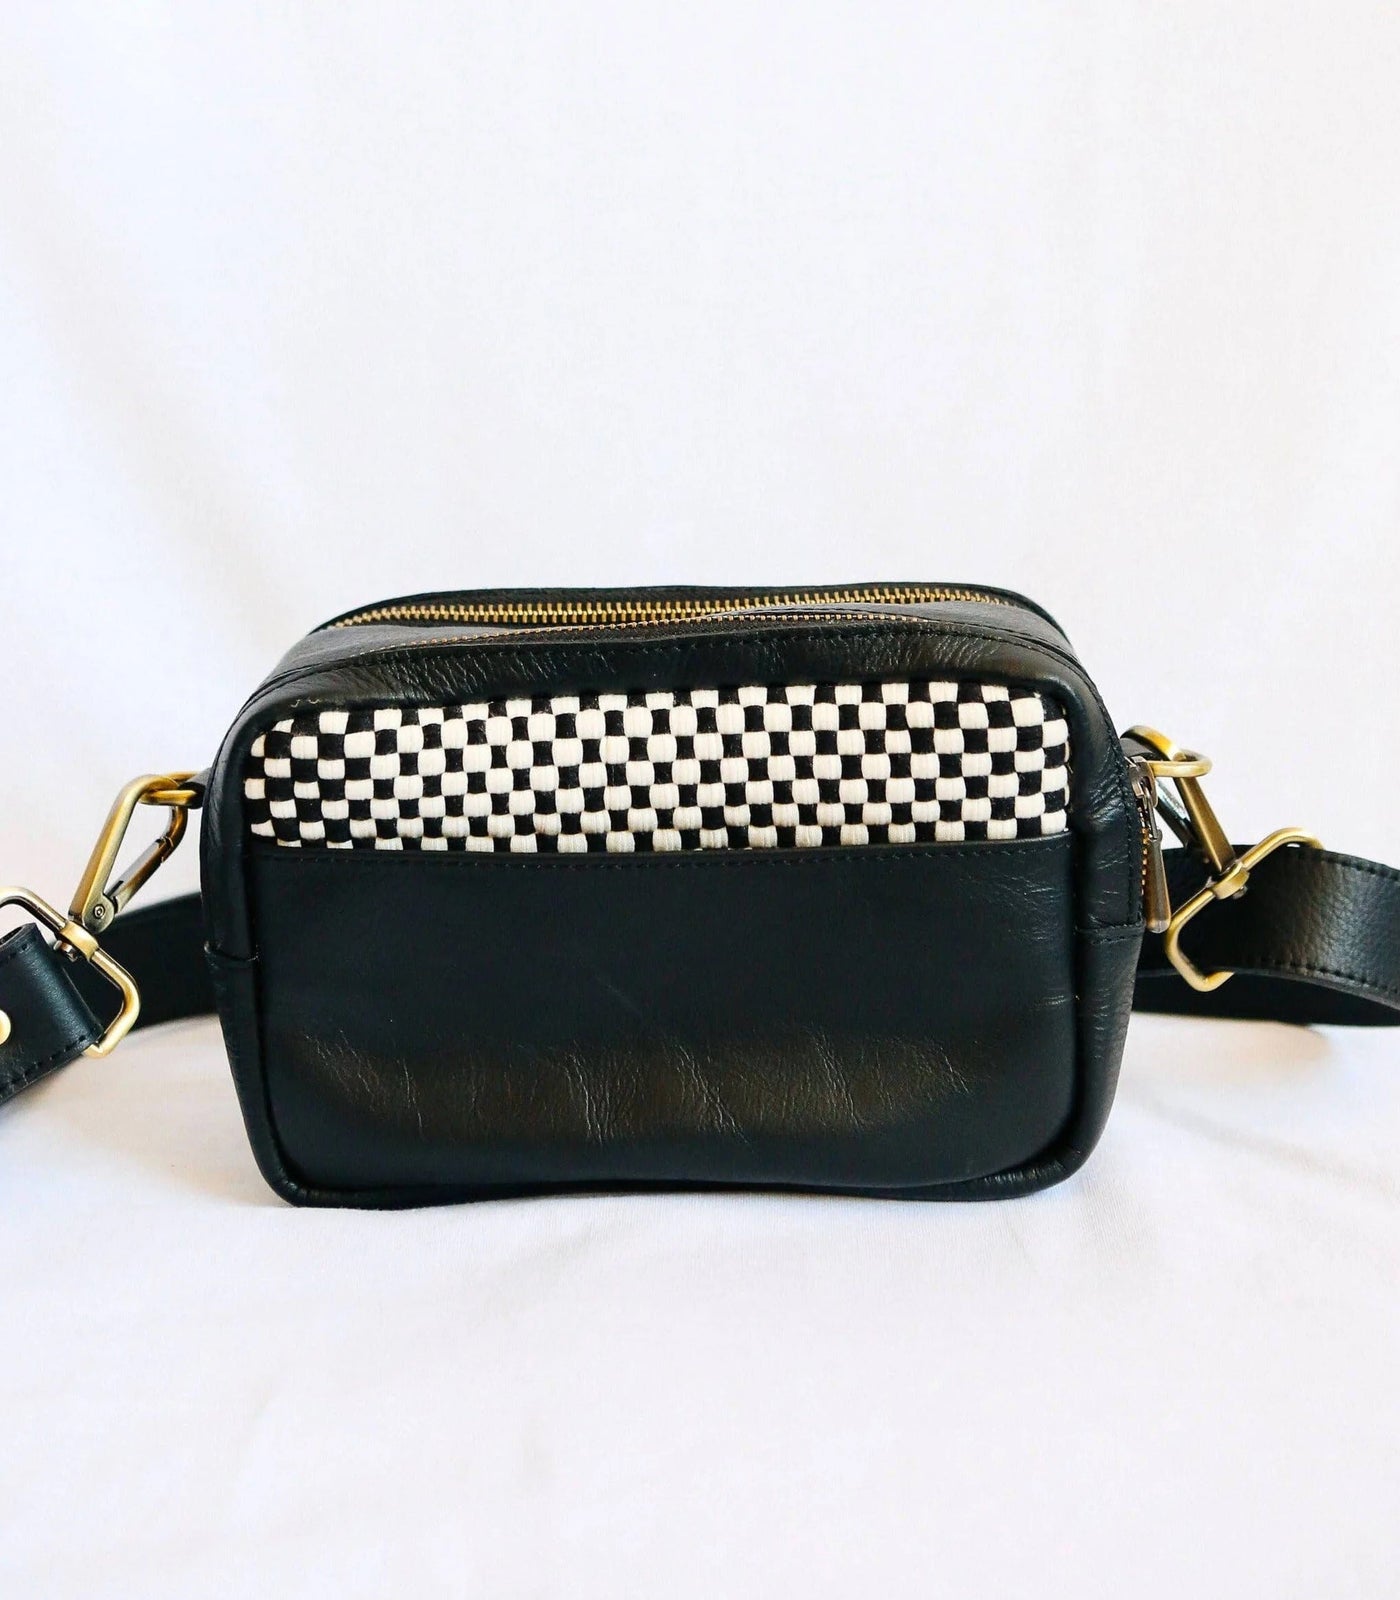 Bento Bag in Black - Rags2Riches